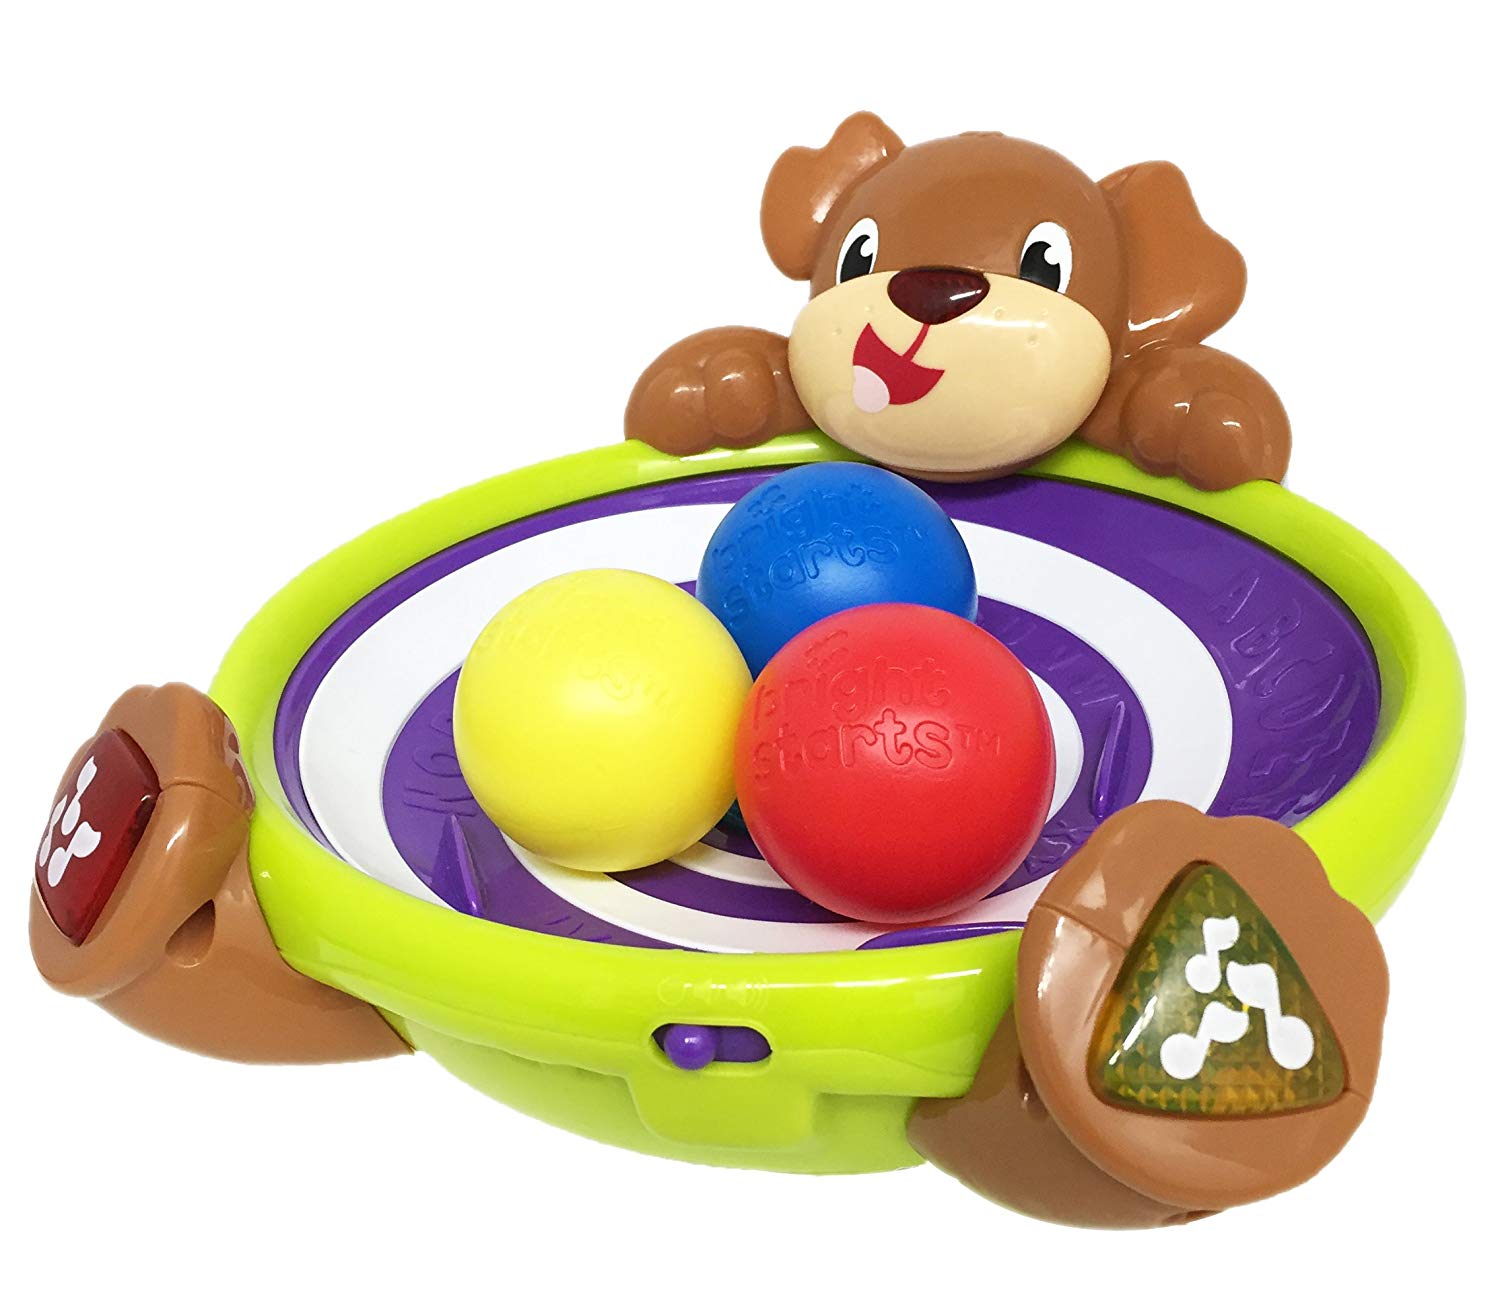 Bright Starts 52176 Lights Ball Spin And Giggle Puppy